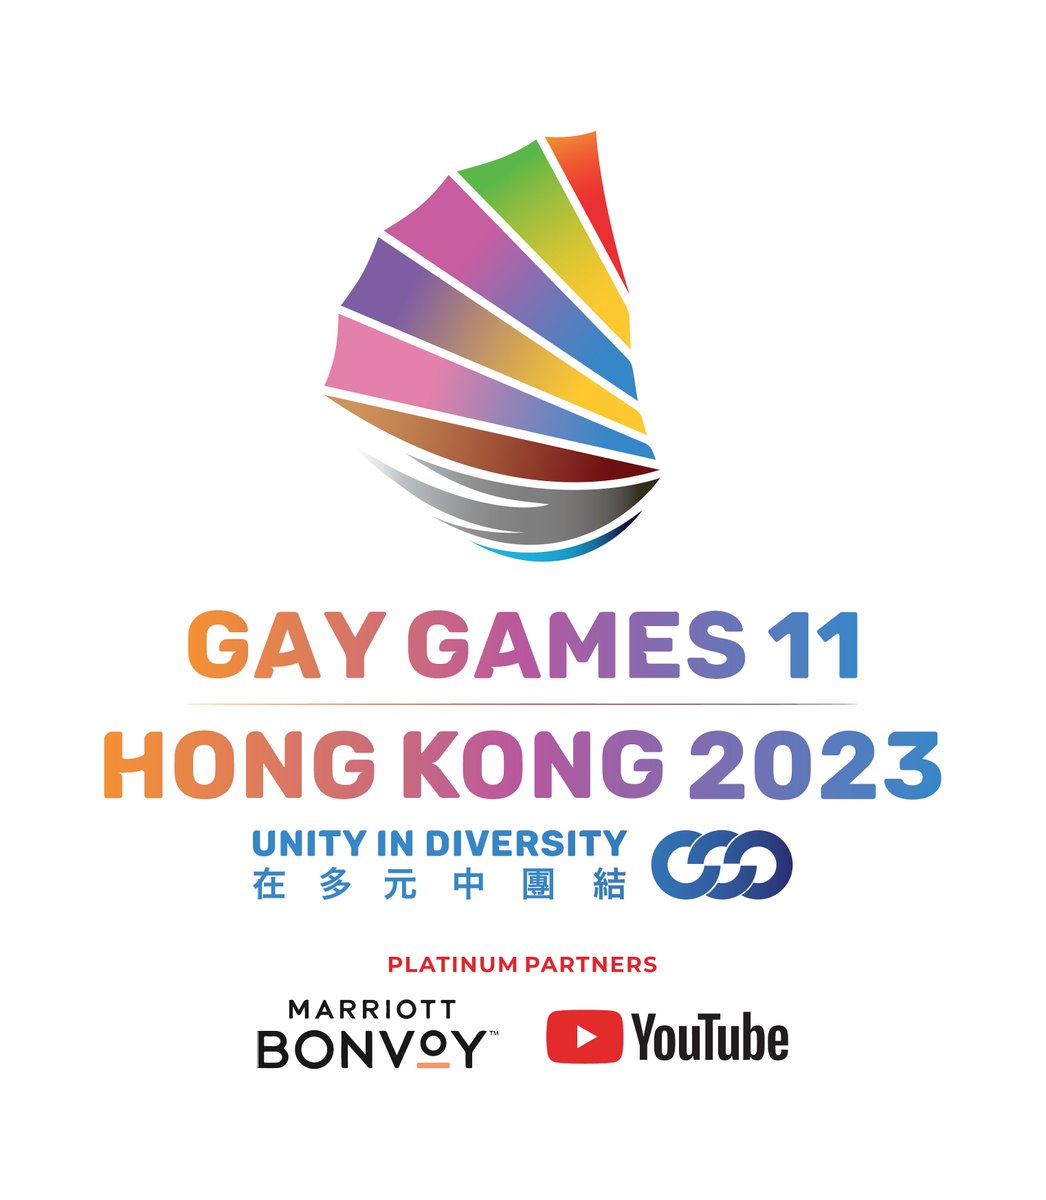 The @GayGamesHK2023 to be co-hosted in Asia and Latin America in two cities - Hong Kong and Guadalajara (3-11 November) with @courtneyact announced as one of the headline acts at the Games in Hong Kong.

Hear this week's LGBTIQA+ news and sport here:
joy.org.au/qnn/2023/03/qn…